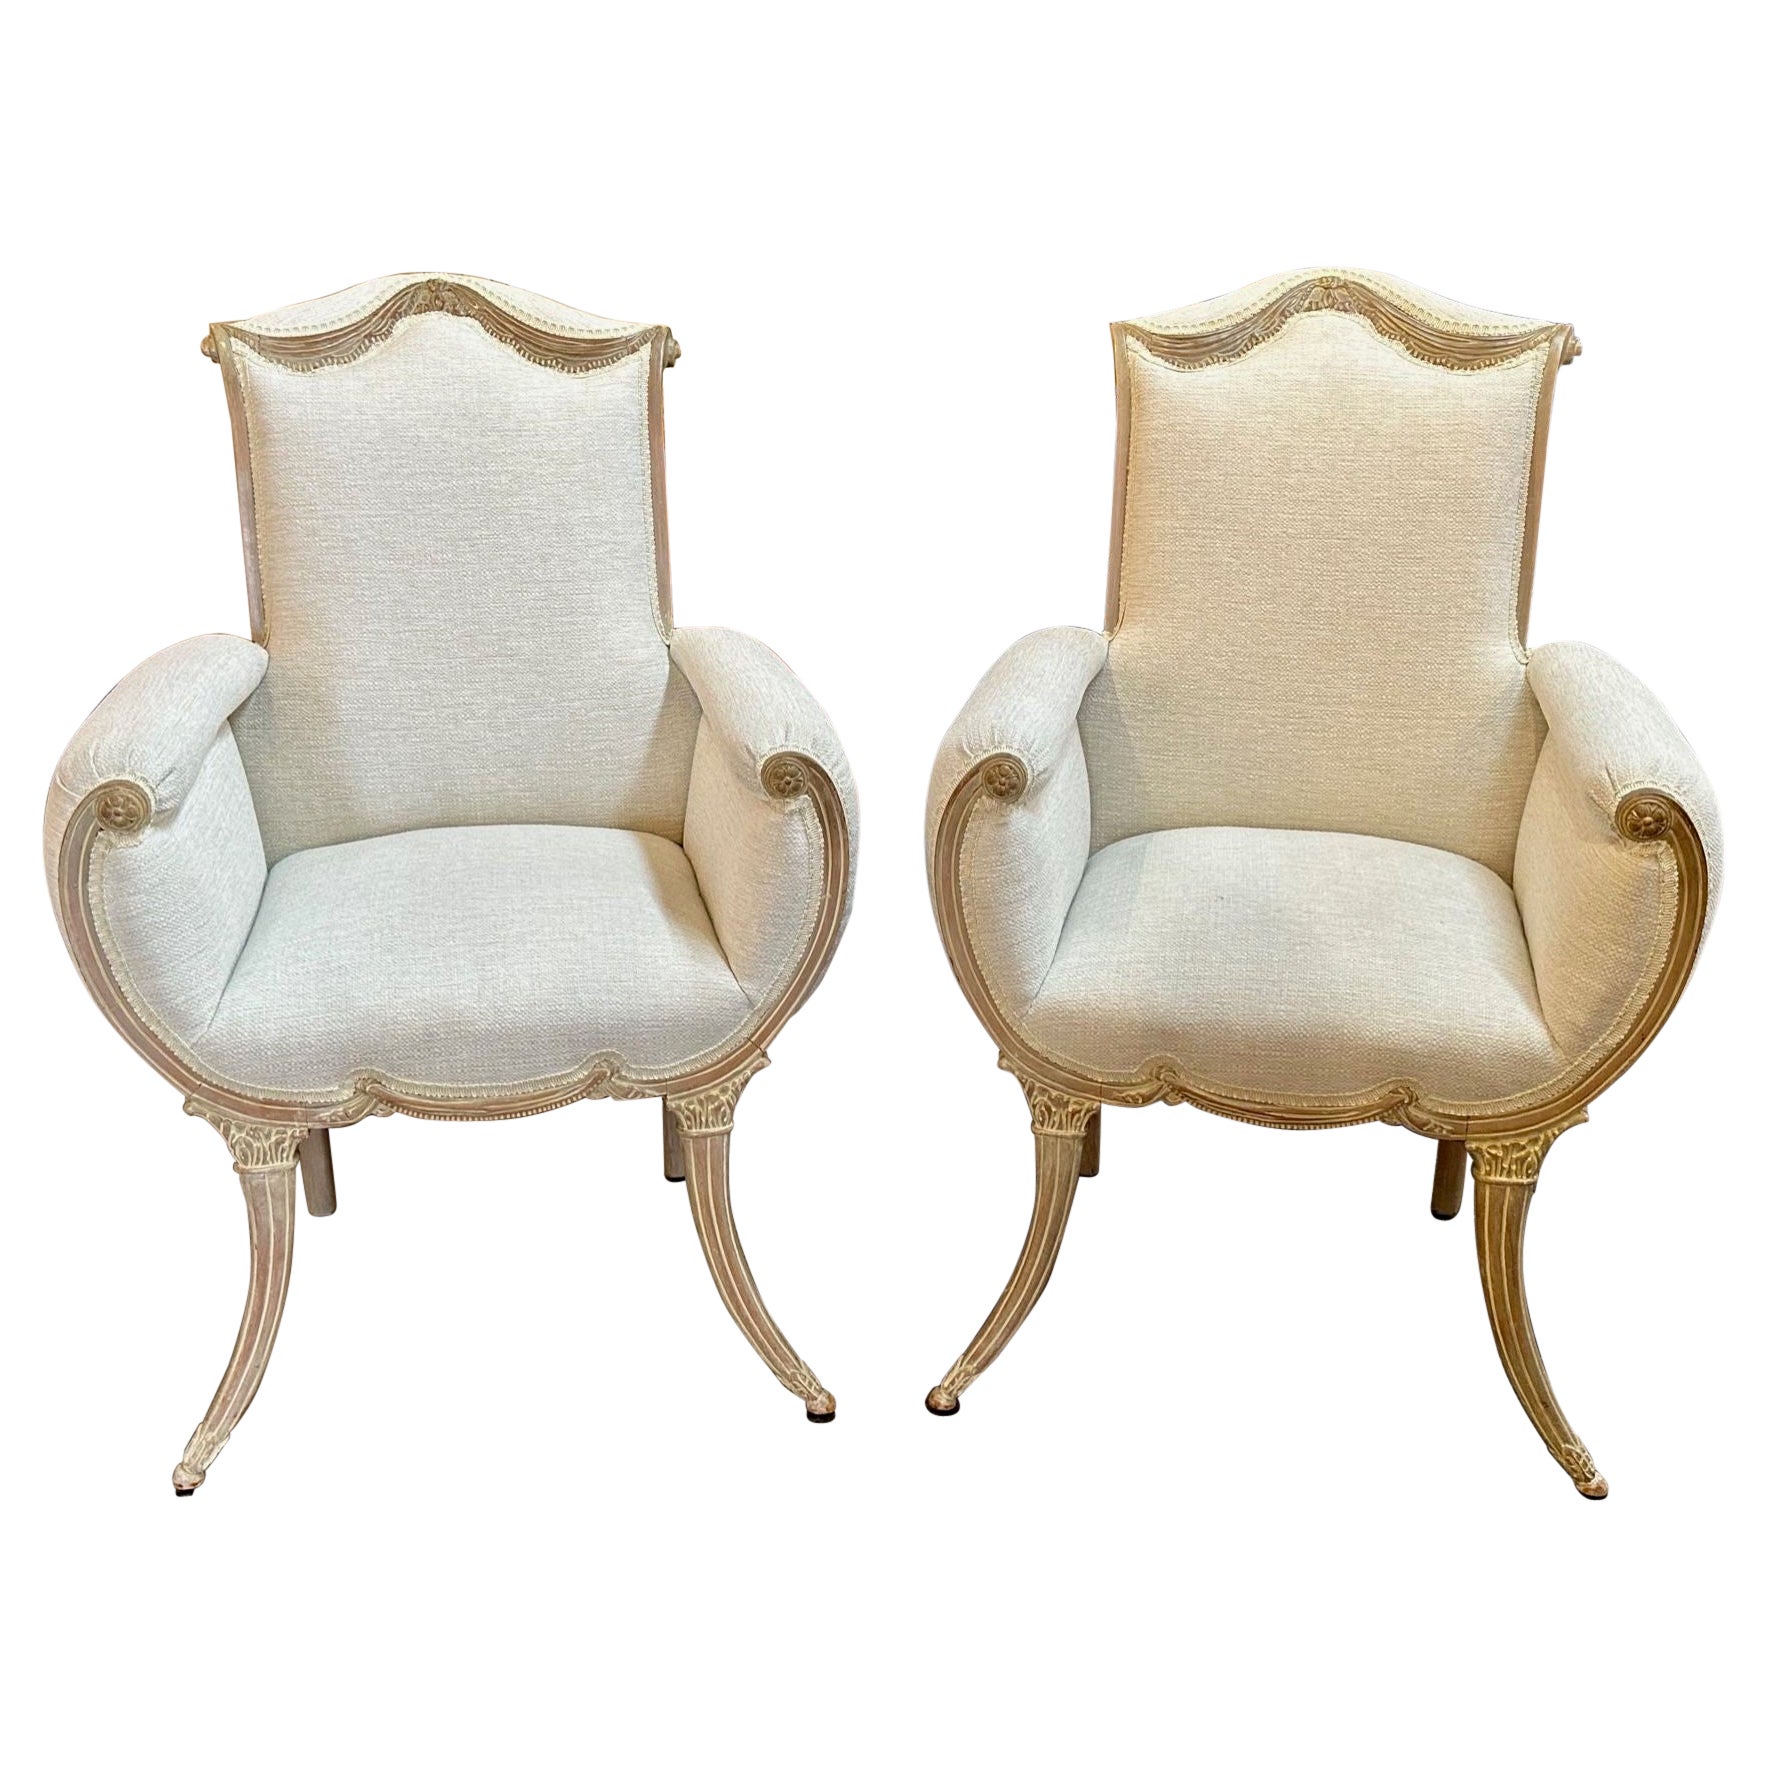 Pair of English Arm Chairs